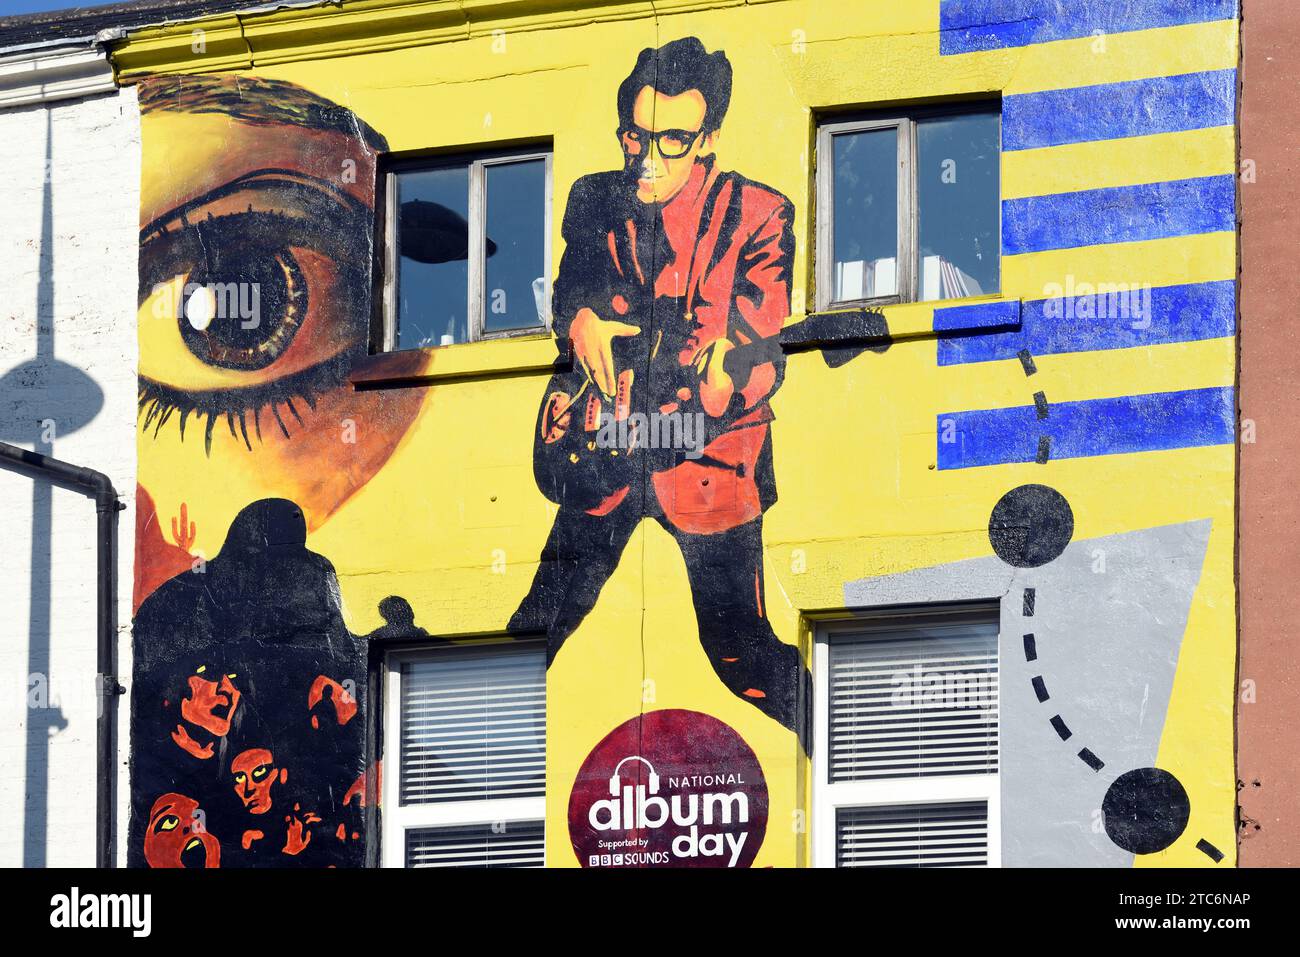 Record Store or Music Shop with Wall Painting of Elvis Costello inspired by his Debut Album 'My Aim is True' (1977), Liverpool England UK Stock Photo